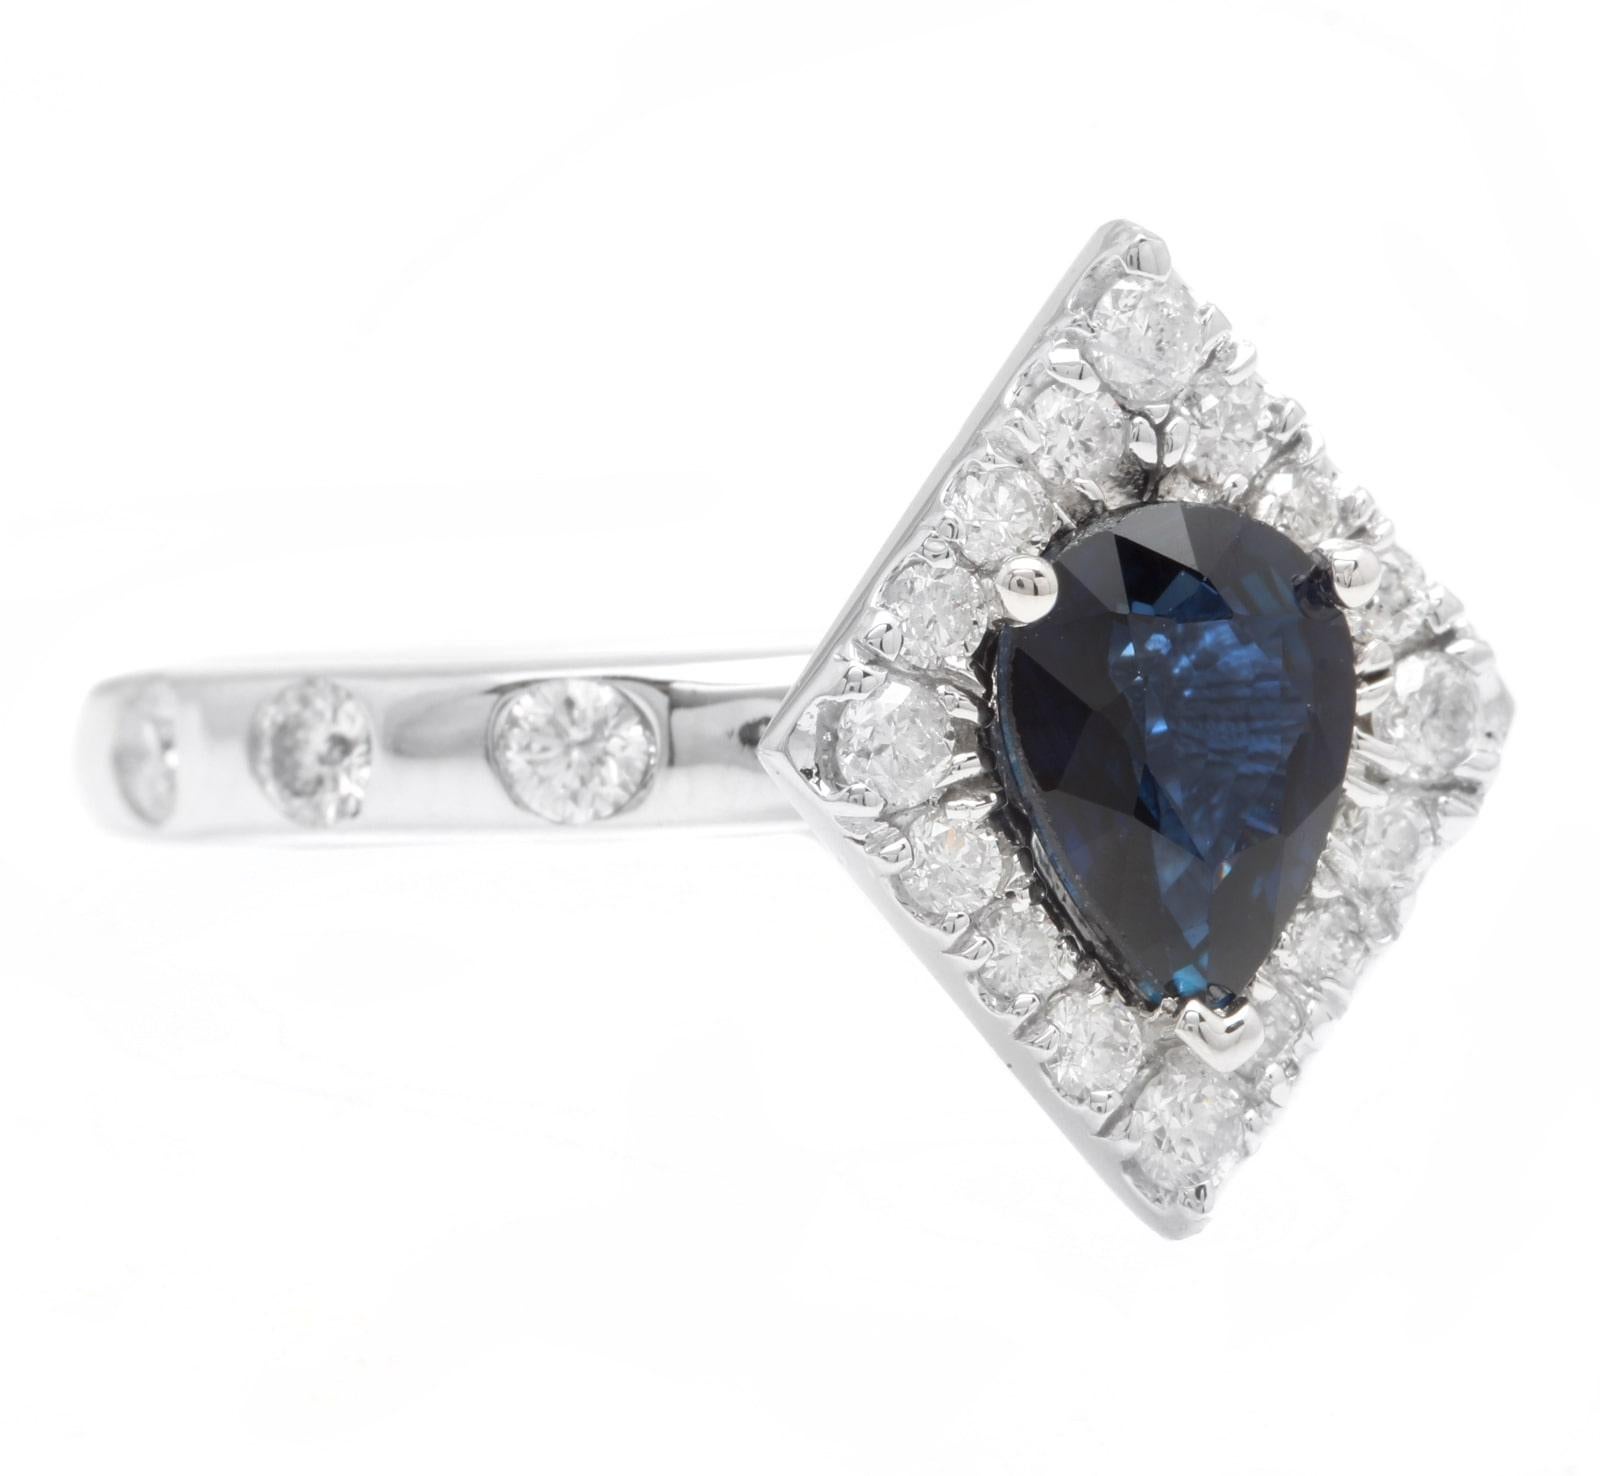 2.15 Carats Exquisite Natural Blue Sapphire and Diamond 14K Solid White Gold Ring

Suggested Replacement Value $6,000.00

Total Natural Blue Sapphire Weight is: Approx. 1.50 Carats 

Sapphire Measures: Approx. 8.00 x 6.00mm

Natural Round Diamonds